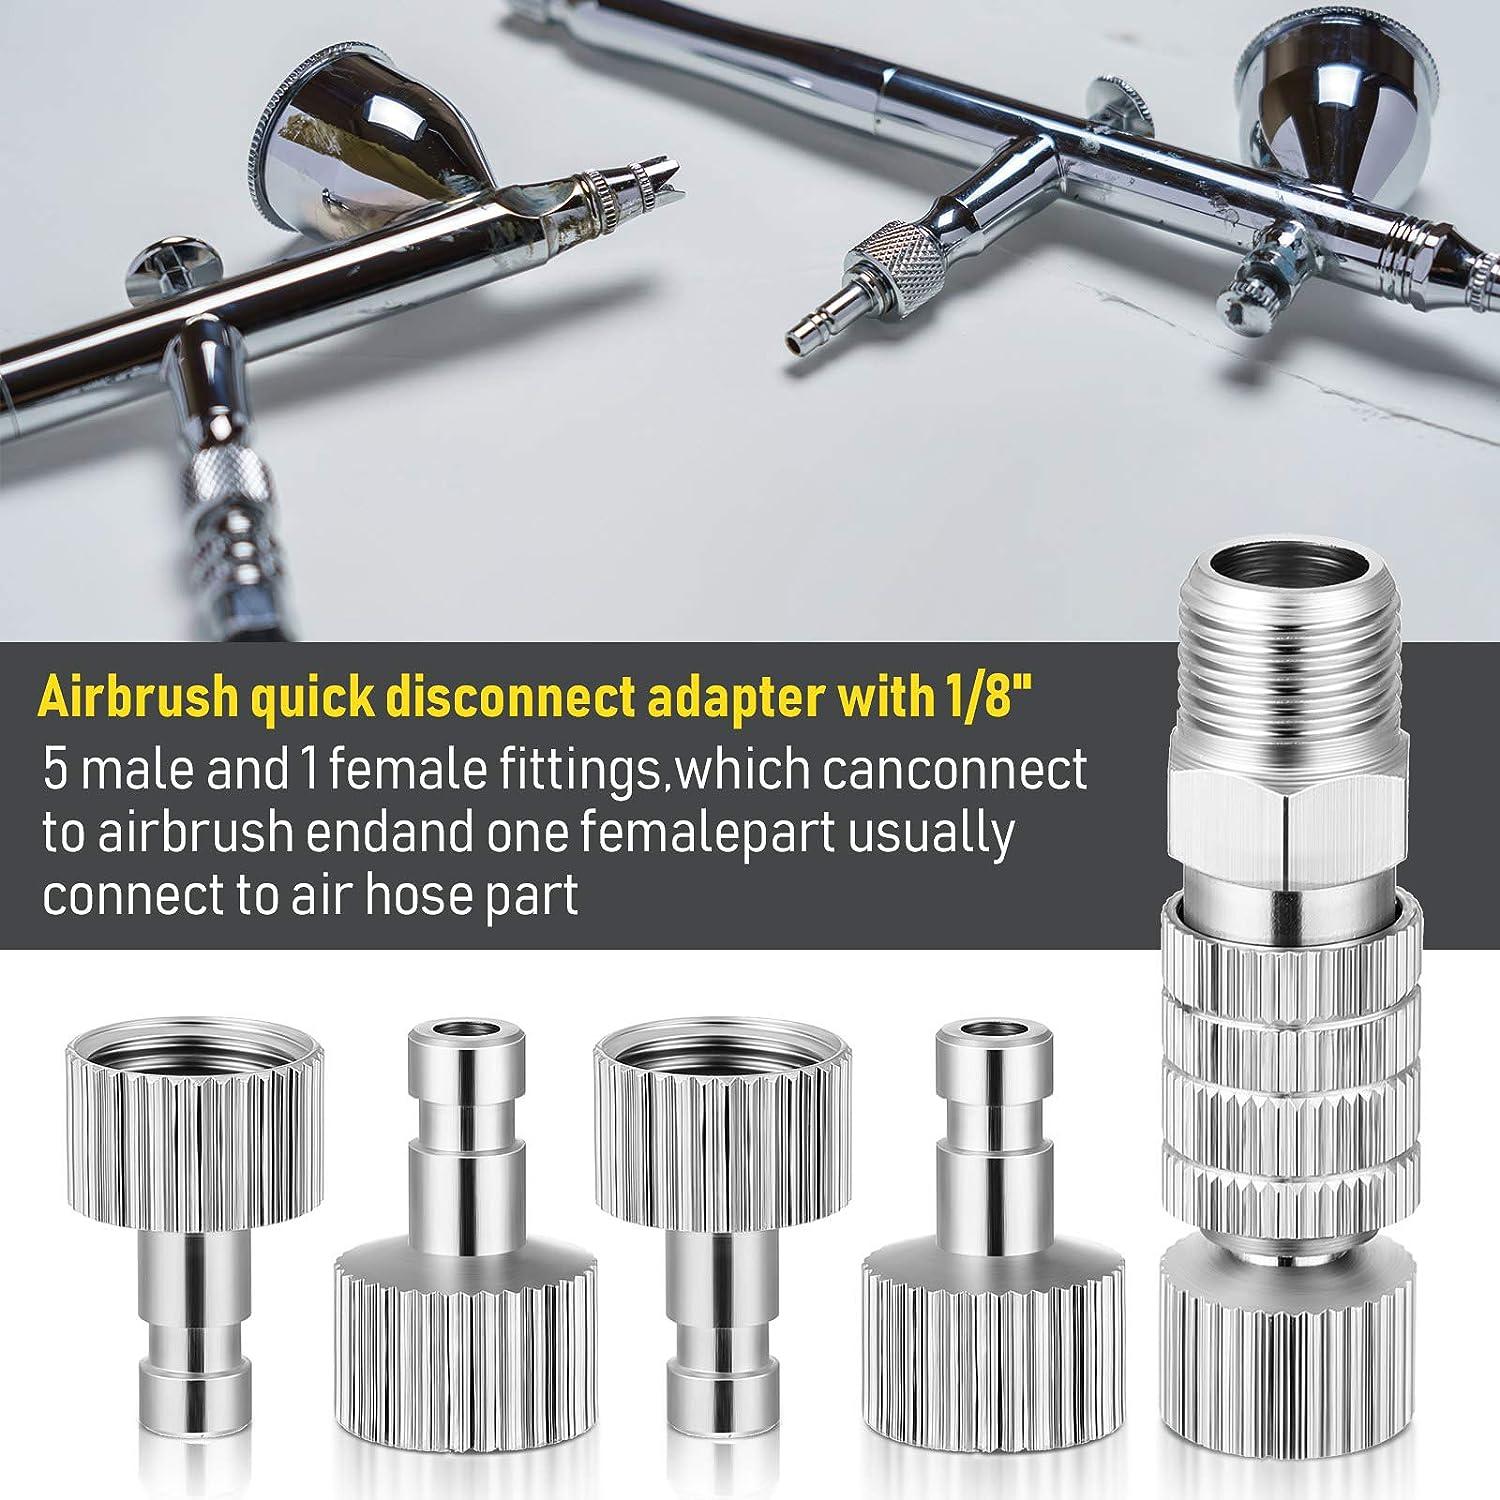 Airbrush Quick Release Coupling Disconnect Adapter Kit 5 Pieces 1/8 Inch  Female Connectors and Male Adapters Adjustment Control Valve Airbrush  Accessories for Air Compressor and Airbrush Hose